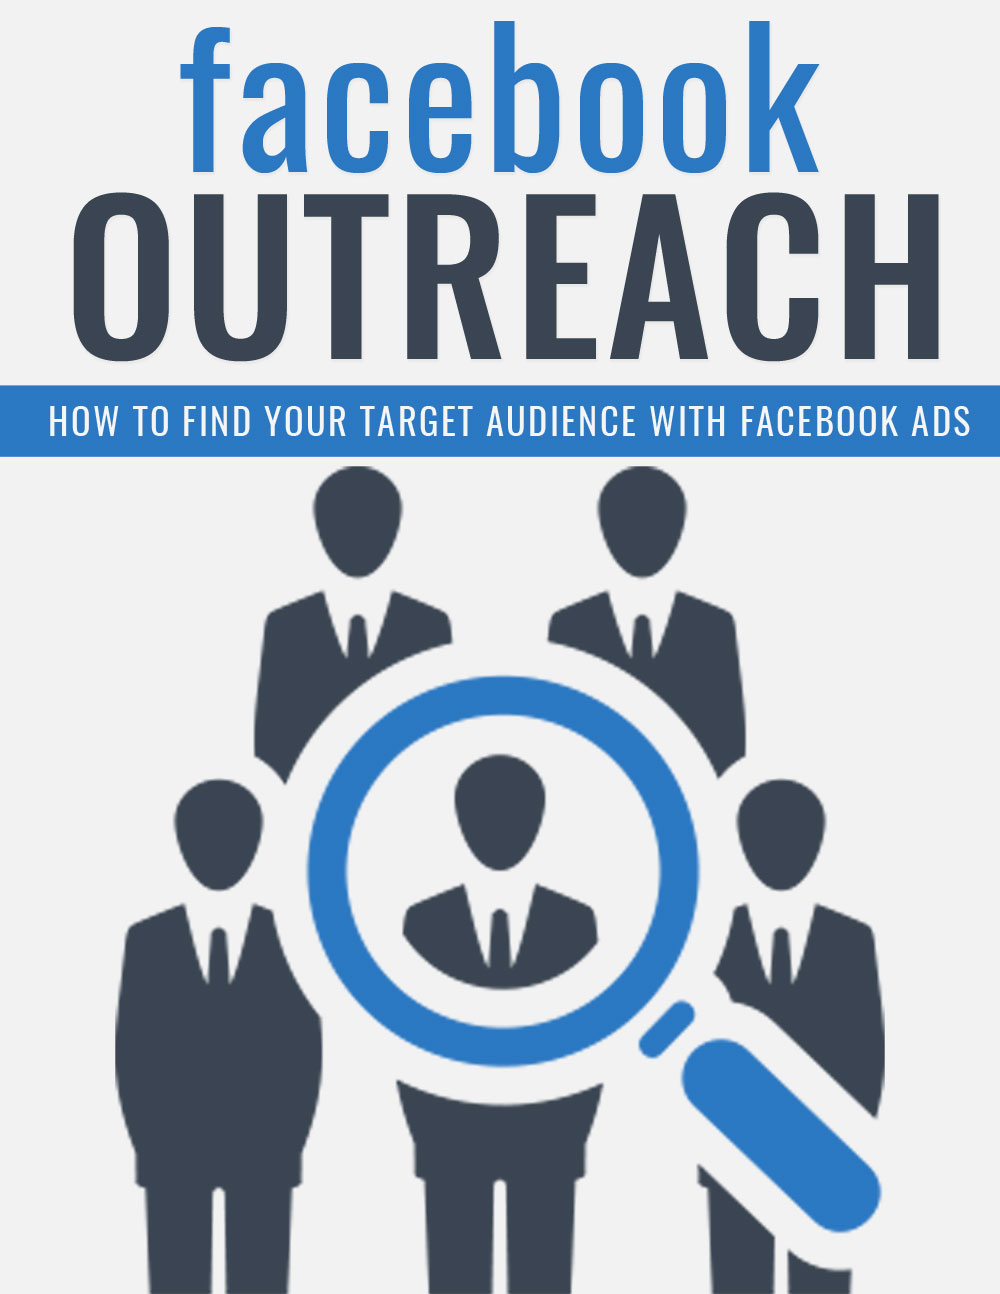 Facebook Outreach (How To Find Your Target Audience With Facebook Ads) Ebook's Book Image